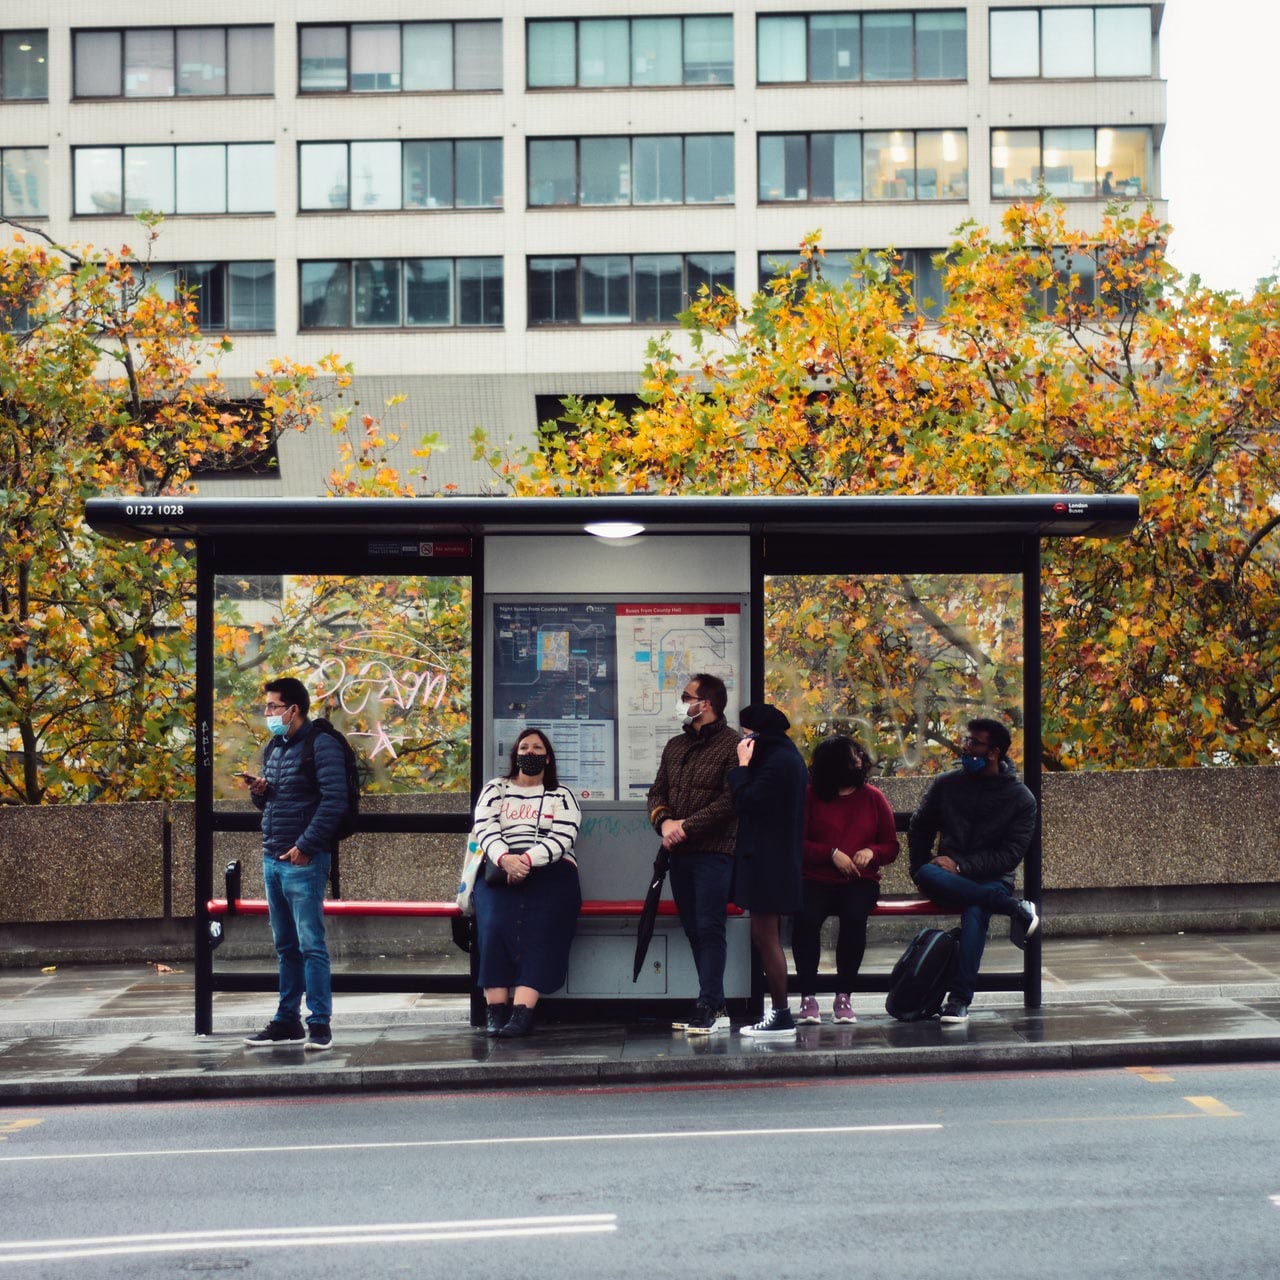 People waiting at a bus stop